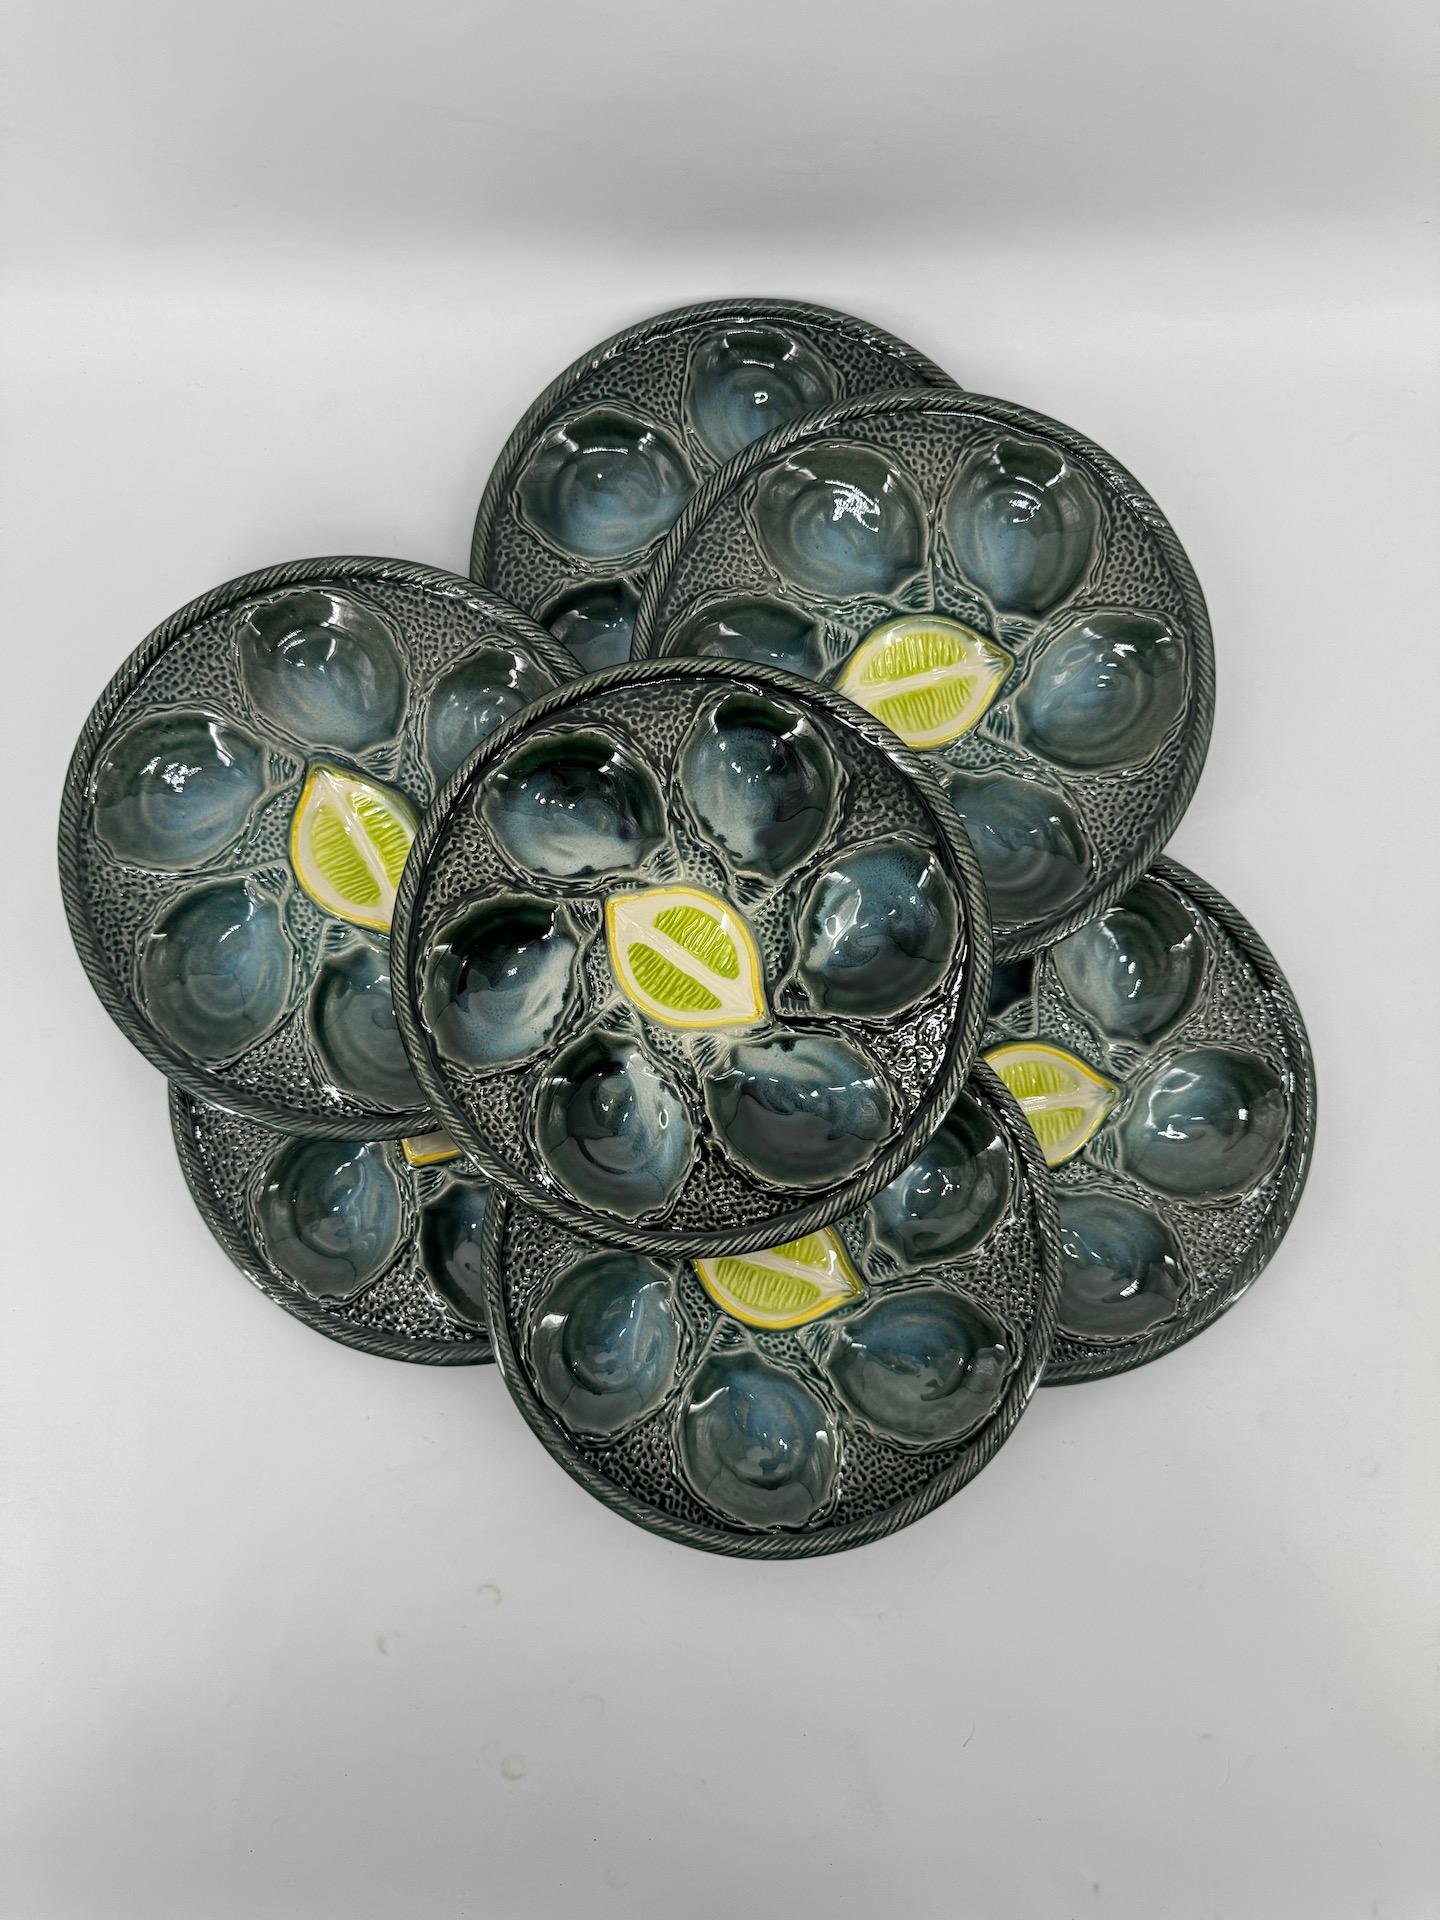 Seven Oyster Plates and one Oyster Dish in Saint Clément Barbotine midcentury

A very fine piece from the Manufacture Saint Clément for presenting oysters, shellfish or other seafood.
The colour is a rare cameo of green and intense bluish green,